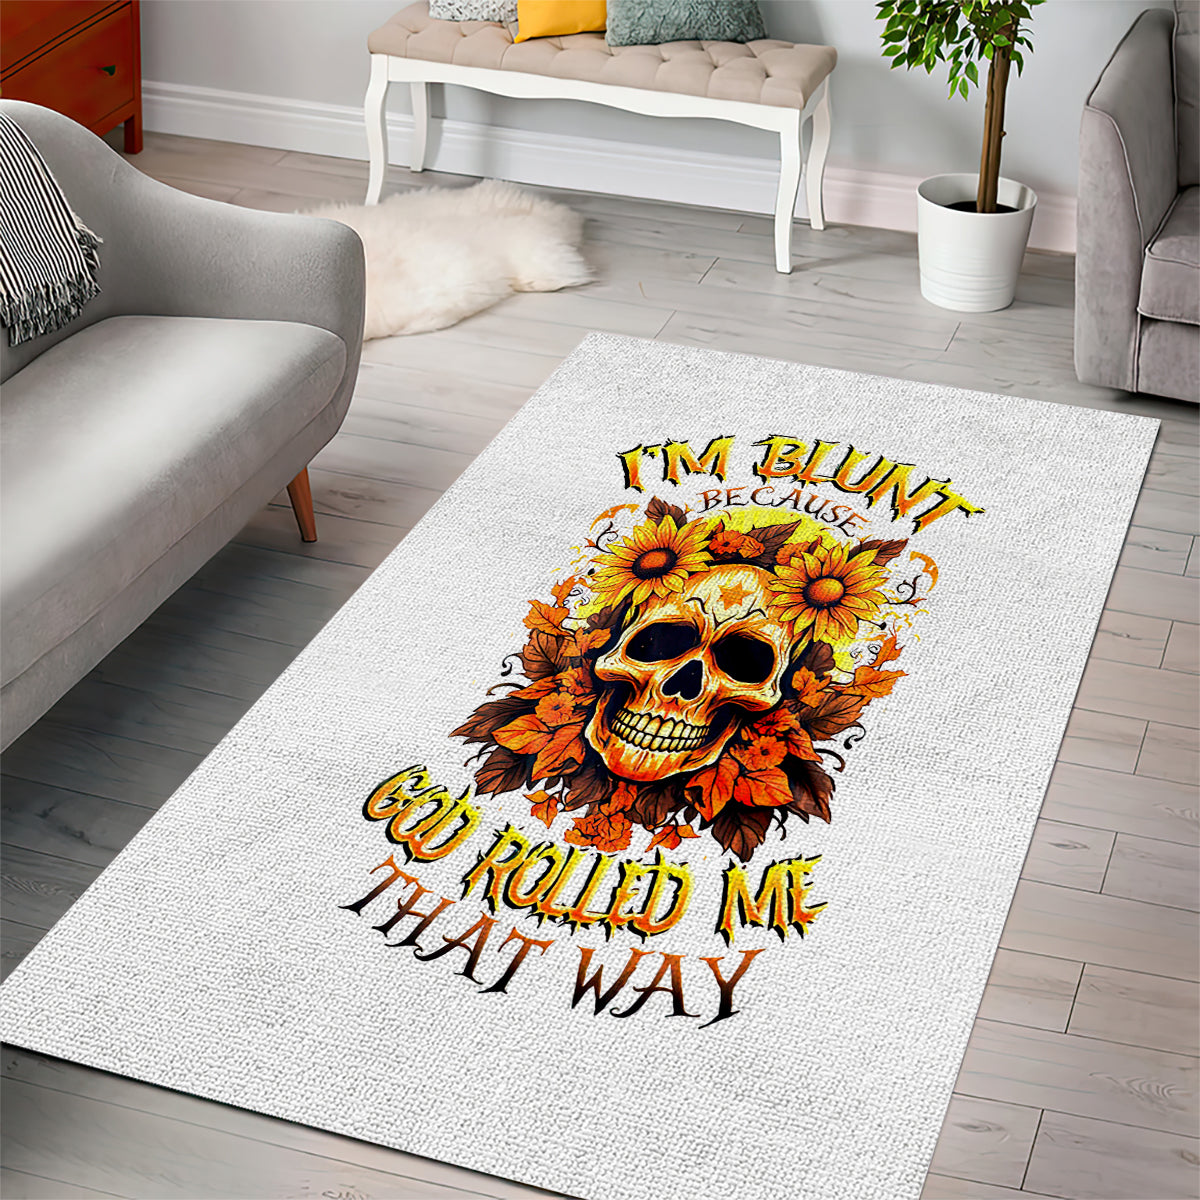 sunflower-skull-area-rug-sunflower-im-blunt-because-god-rolled-me-that-way